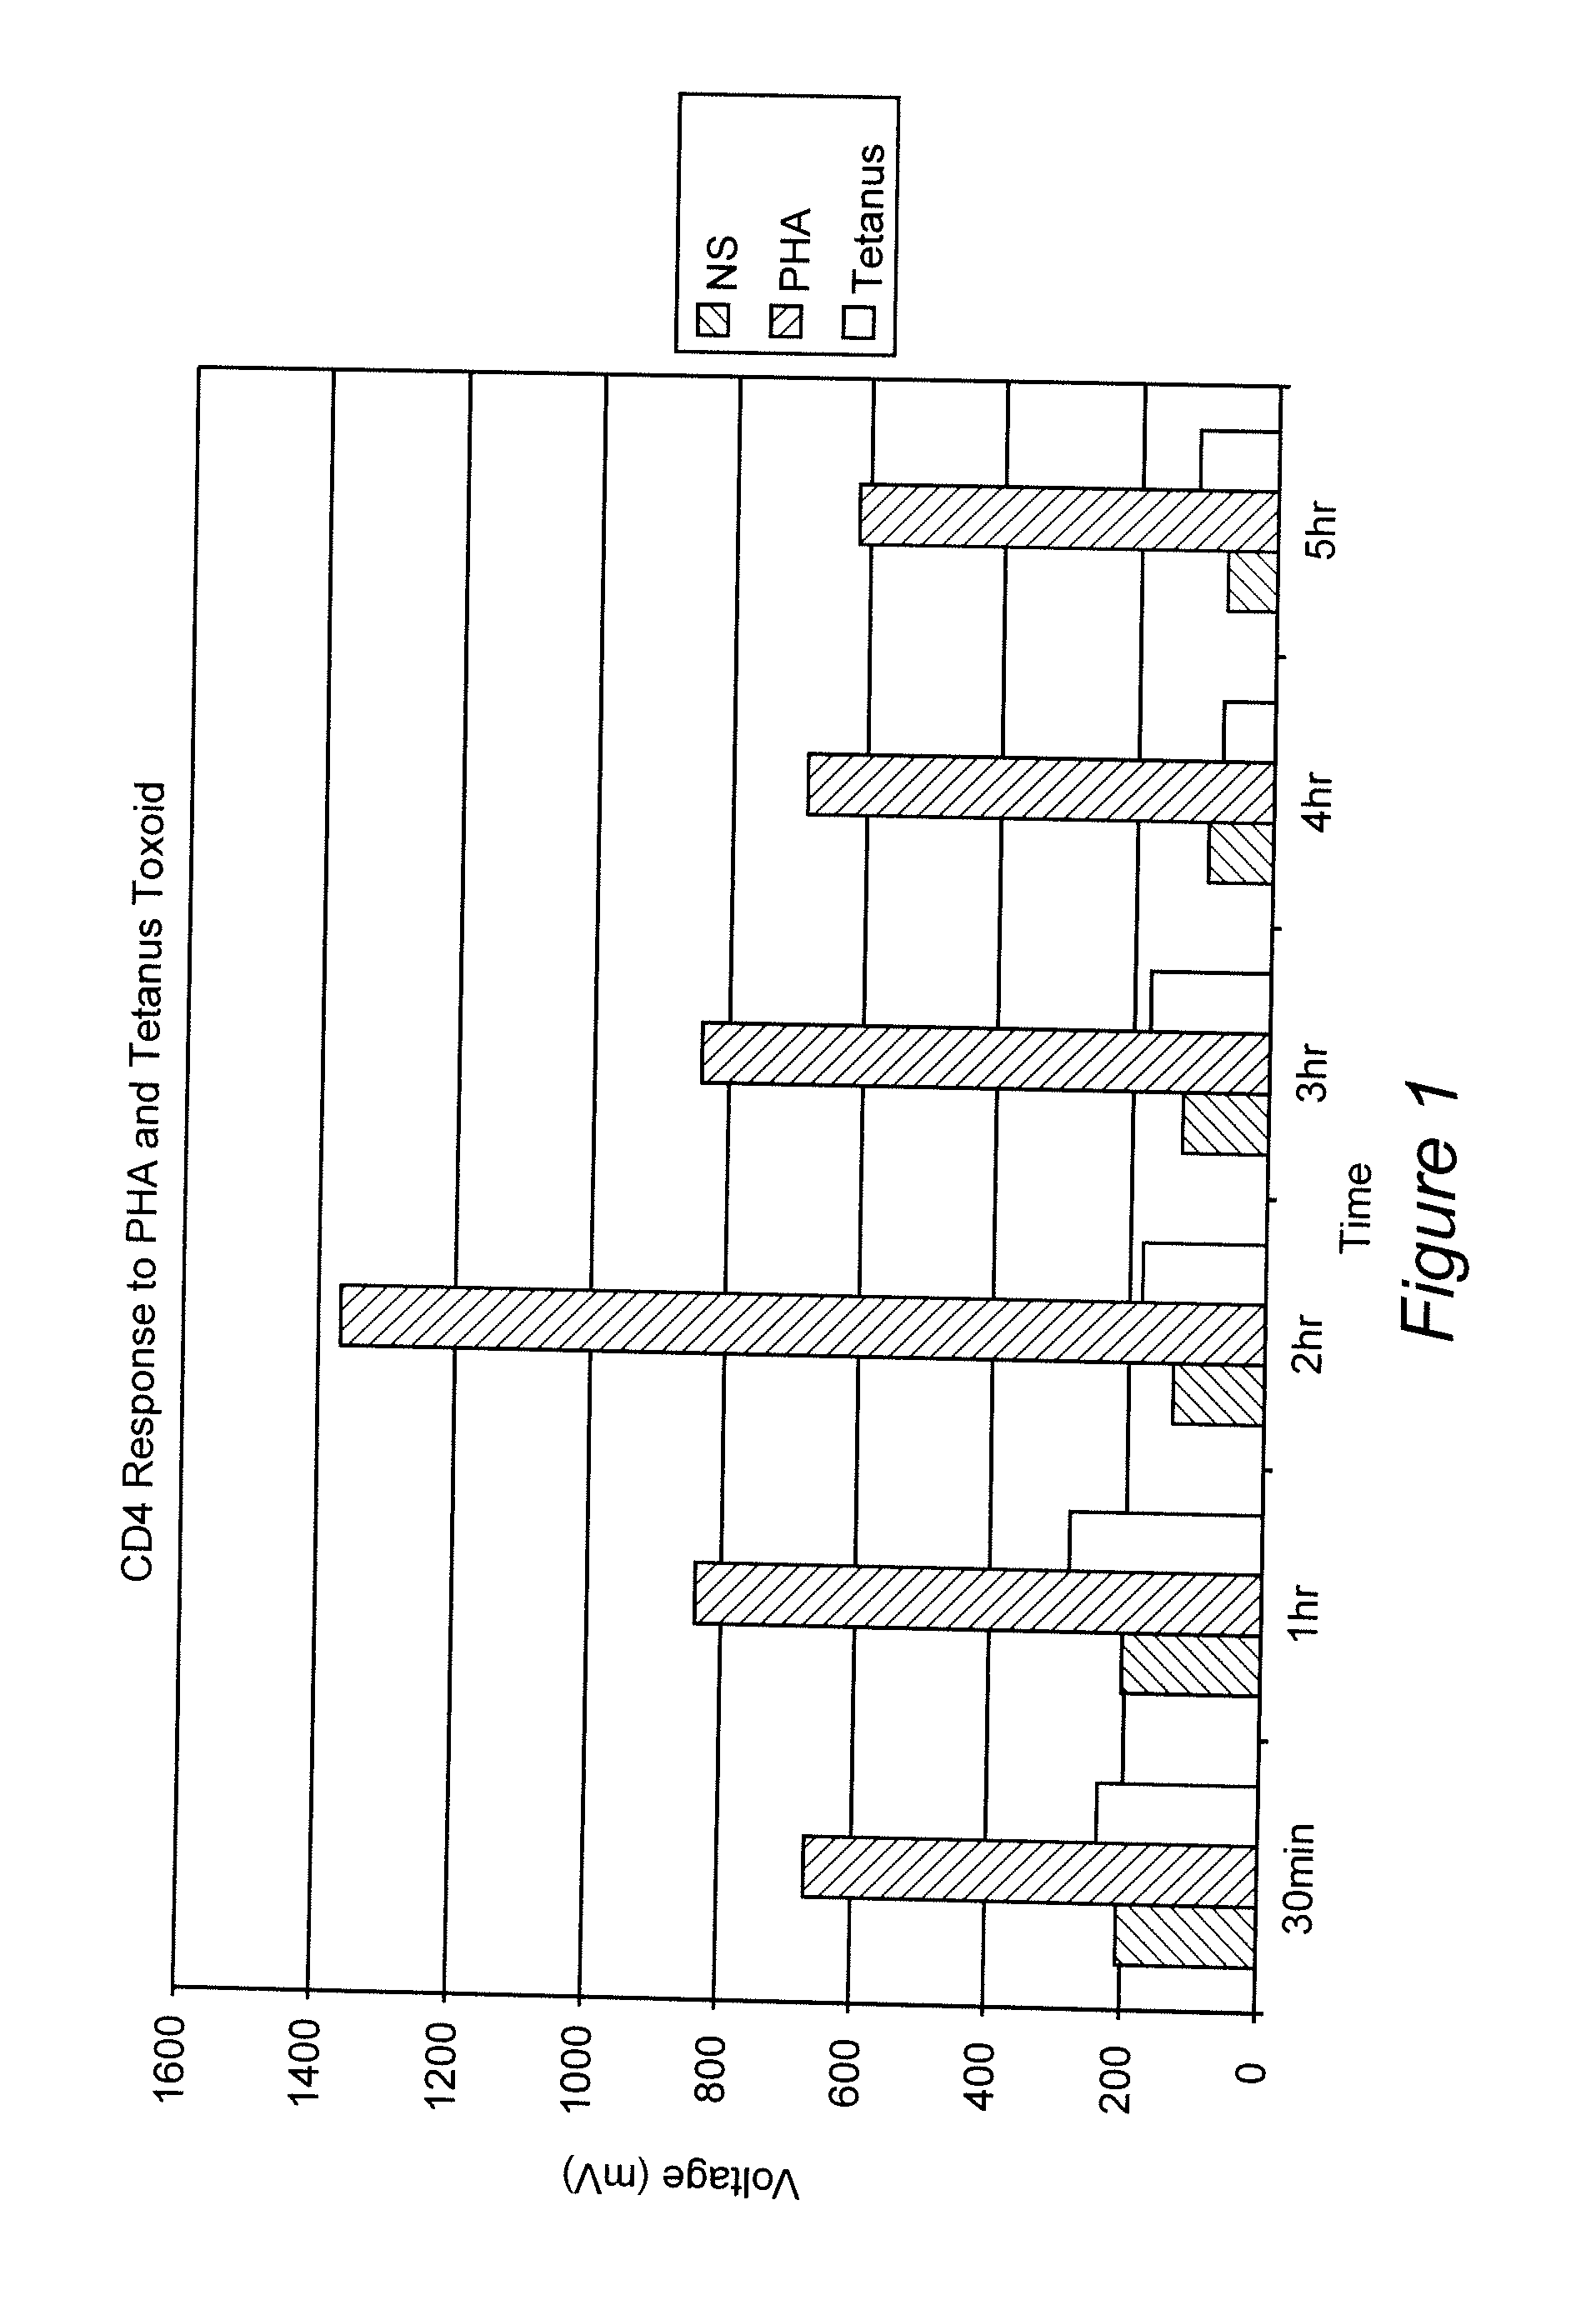 Method to confirm immunosuppression in human patients by measuring lymphocyte activation